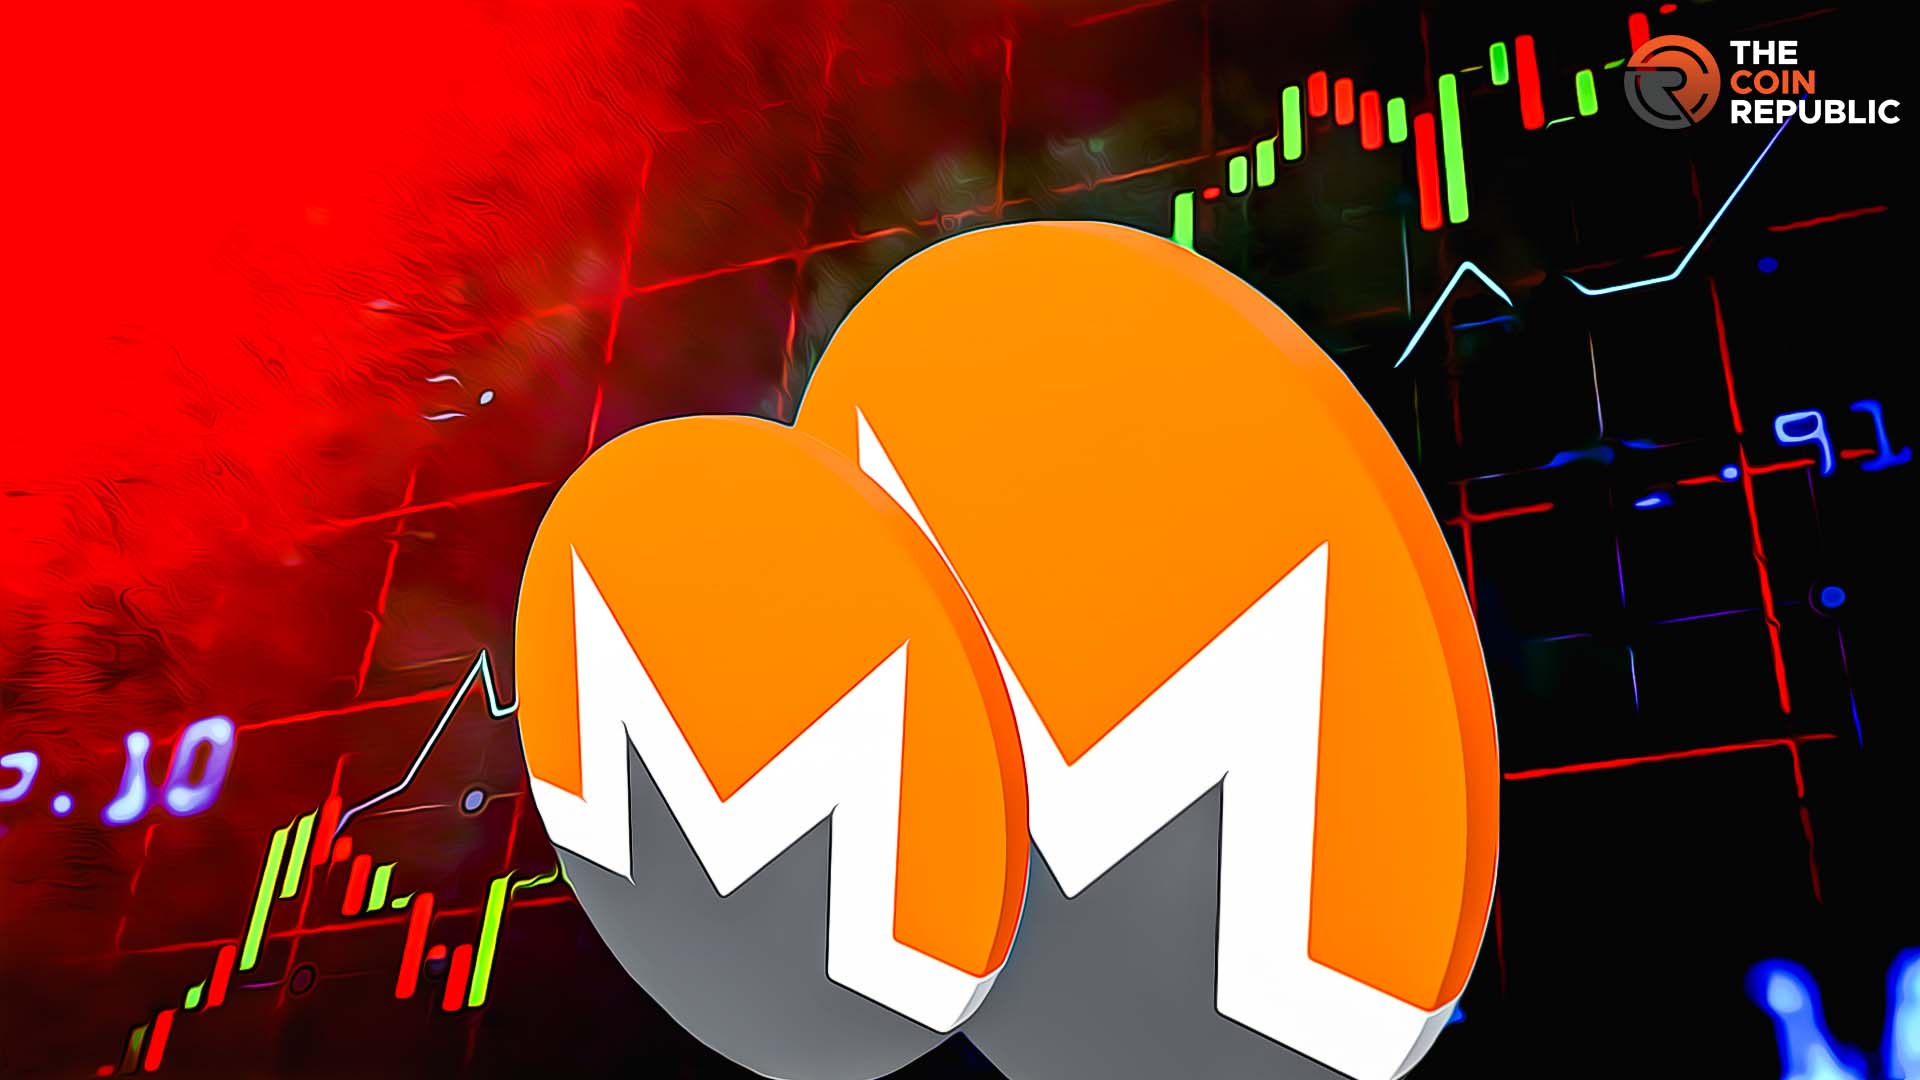 XMR Price Shows a Massive Spike, Is it the Right Time to Buy?